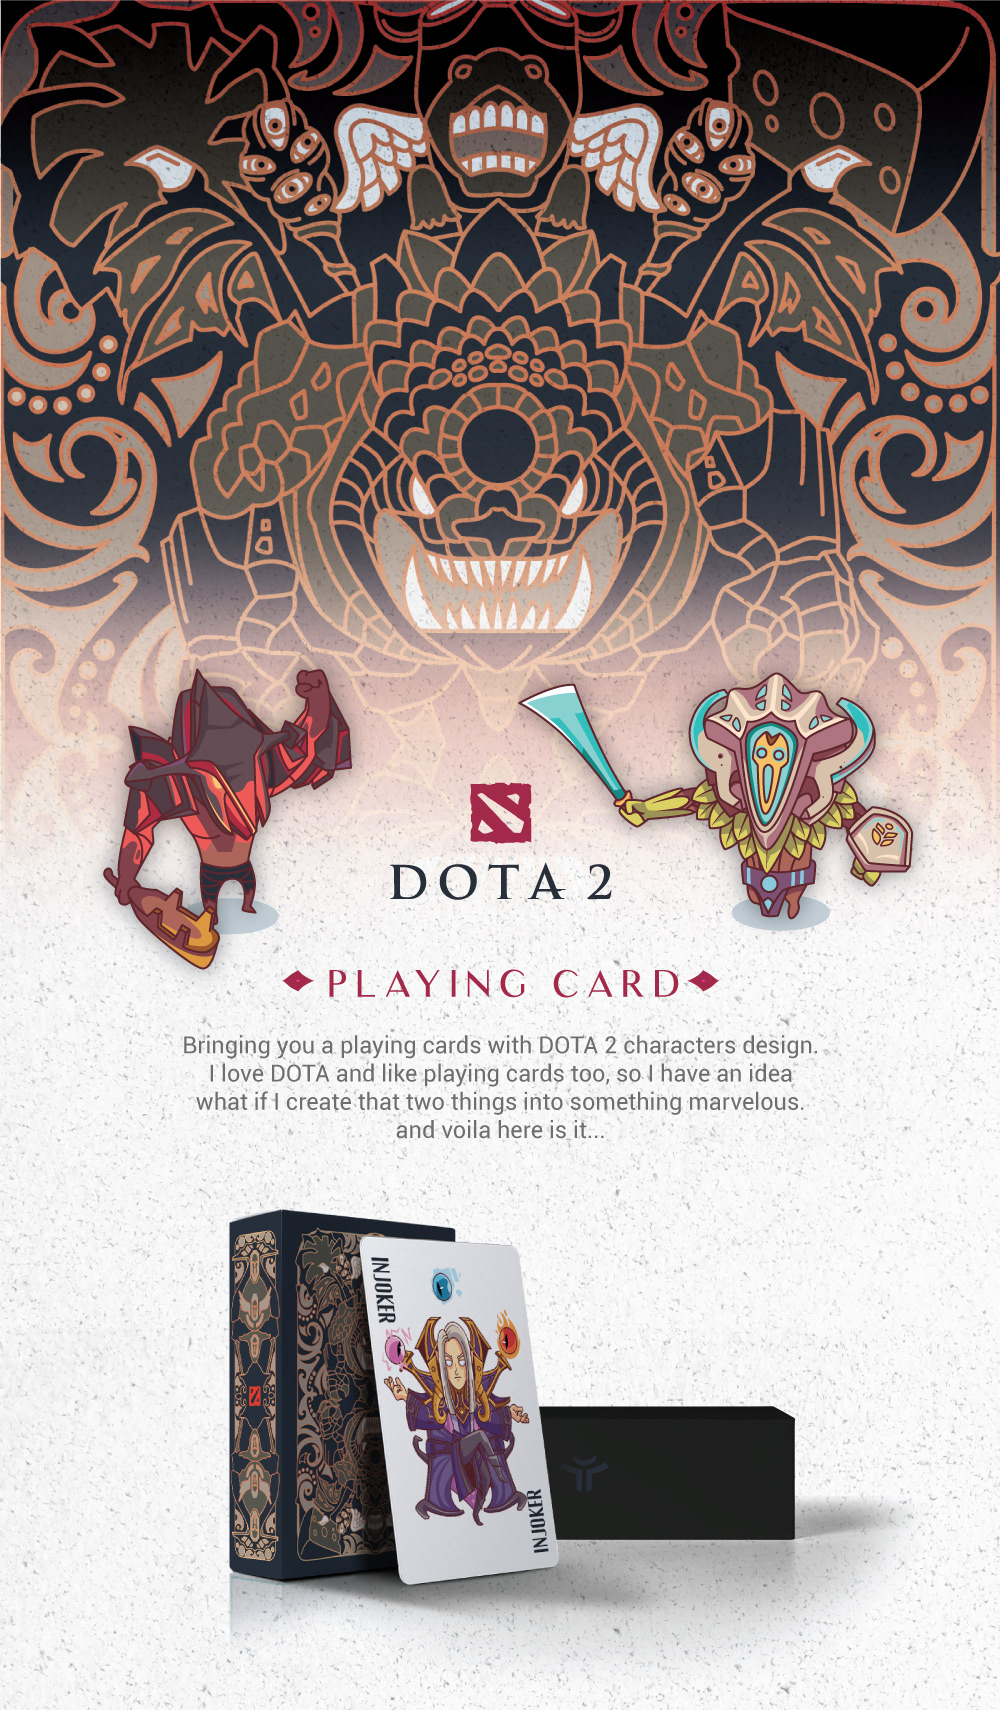 DOTA 2 Deluxe Playing Cards (Black) - Collection playing cards